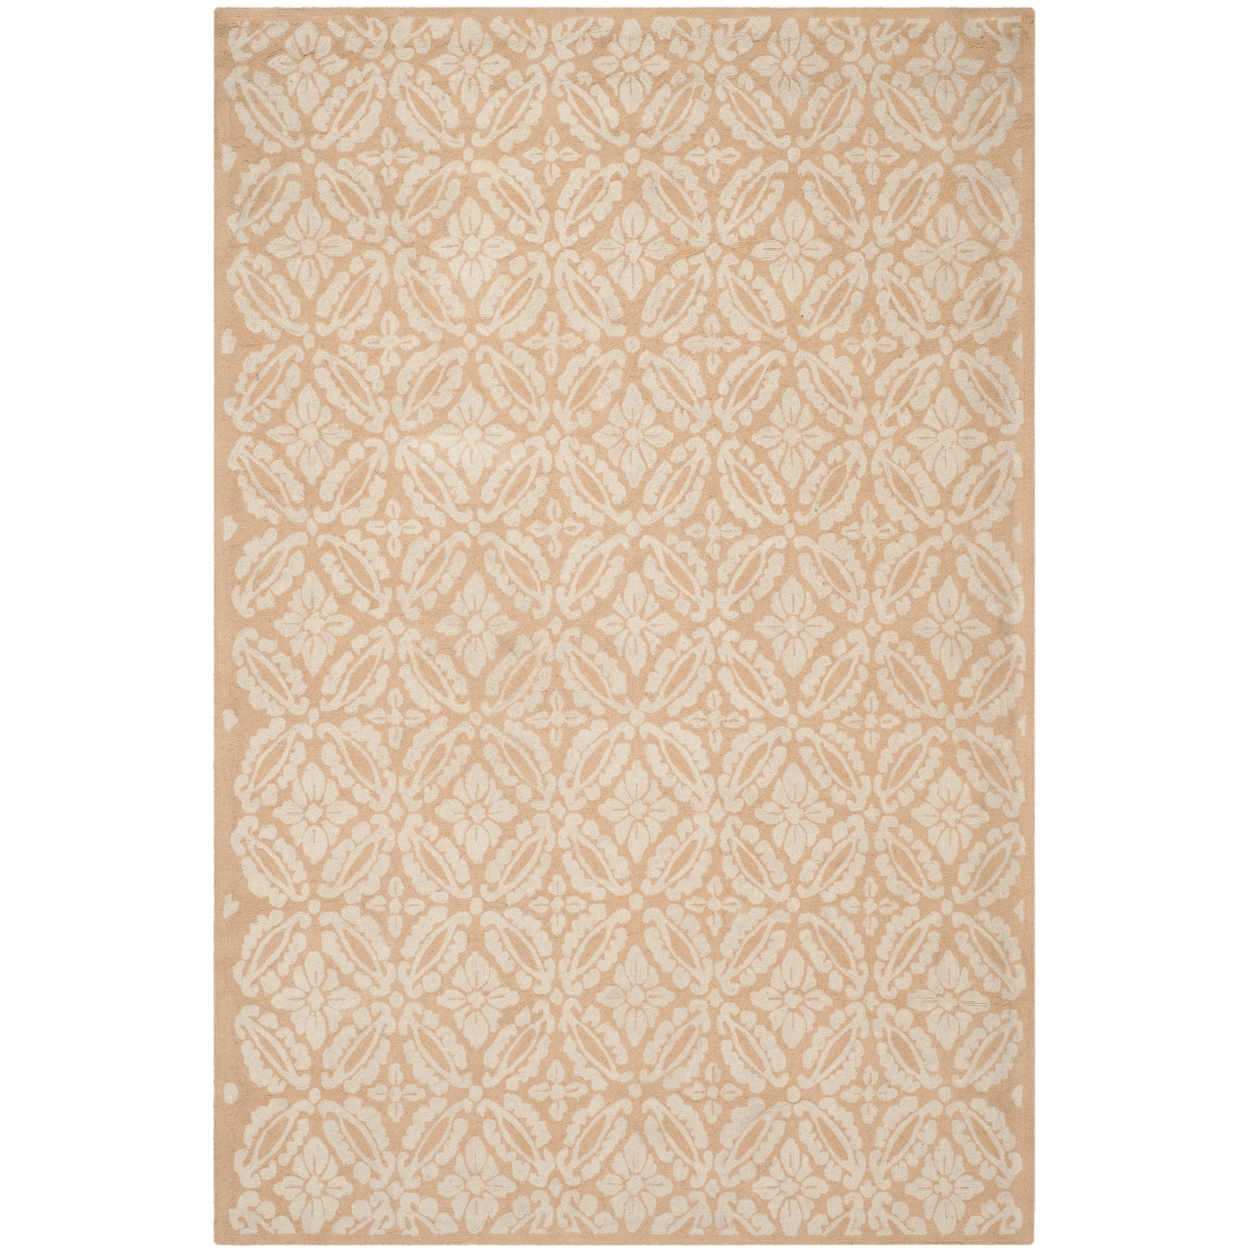 SAFAVIEH Chelsea Collection HK723C Hand-hooked Blush Rug - 7' 9 X 9' 9